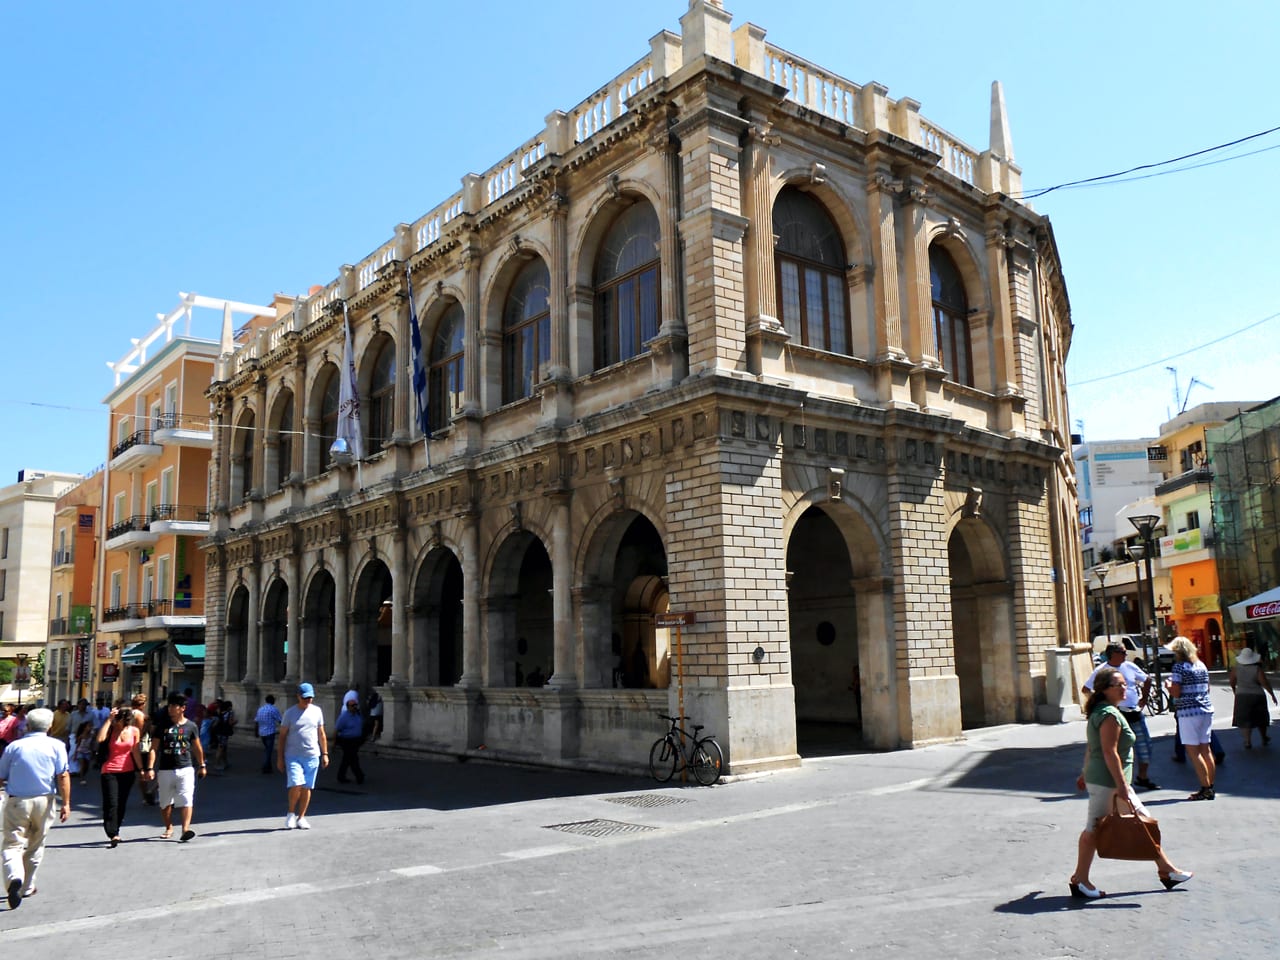 Historical Family Excursion In The City Of Heraklion, historical walk city tour heraklion, iraklion crete city walk tour, family activity heraklion crete, best city tour heraklion, things to do heraklion crete